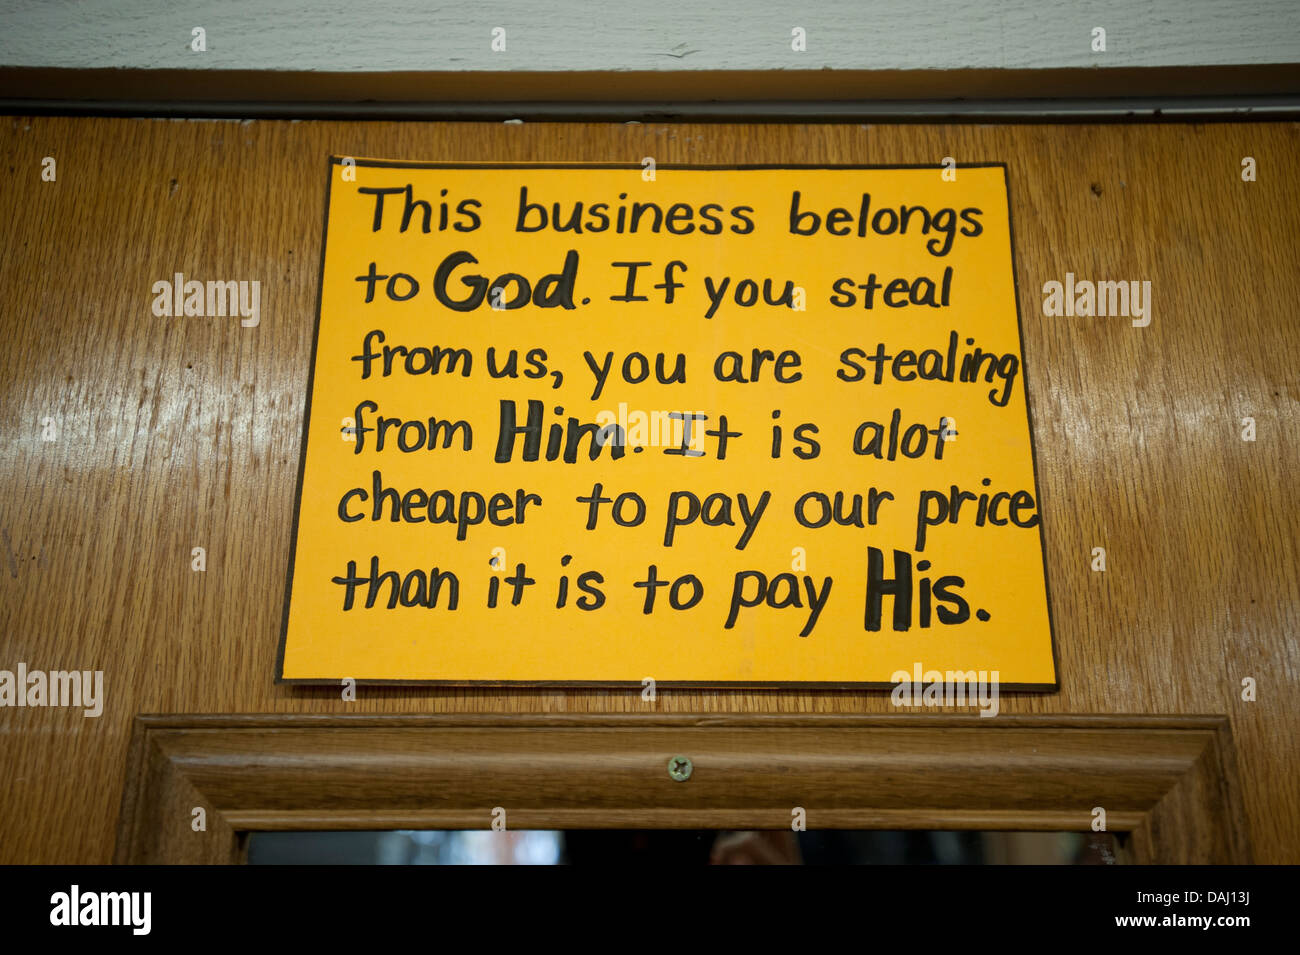 Sign in a shop in Cantril, Iowa, United States of America Stock Photo